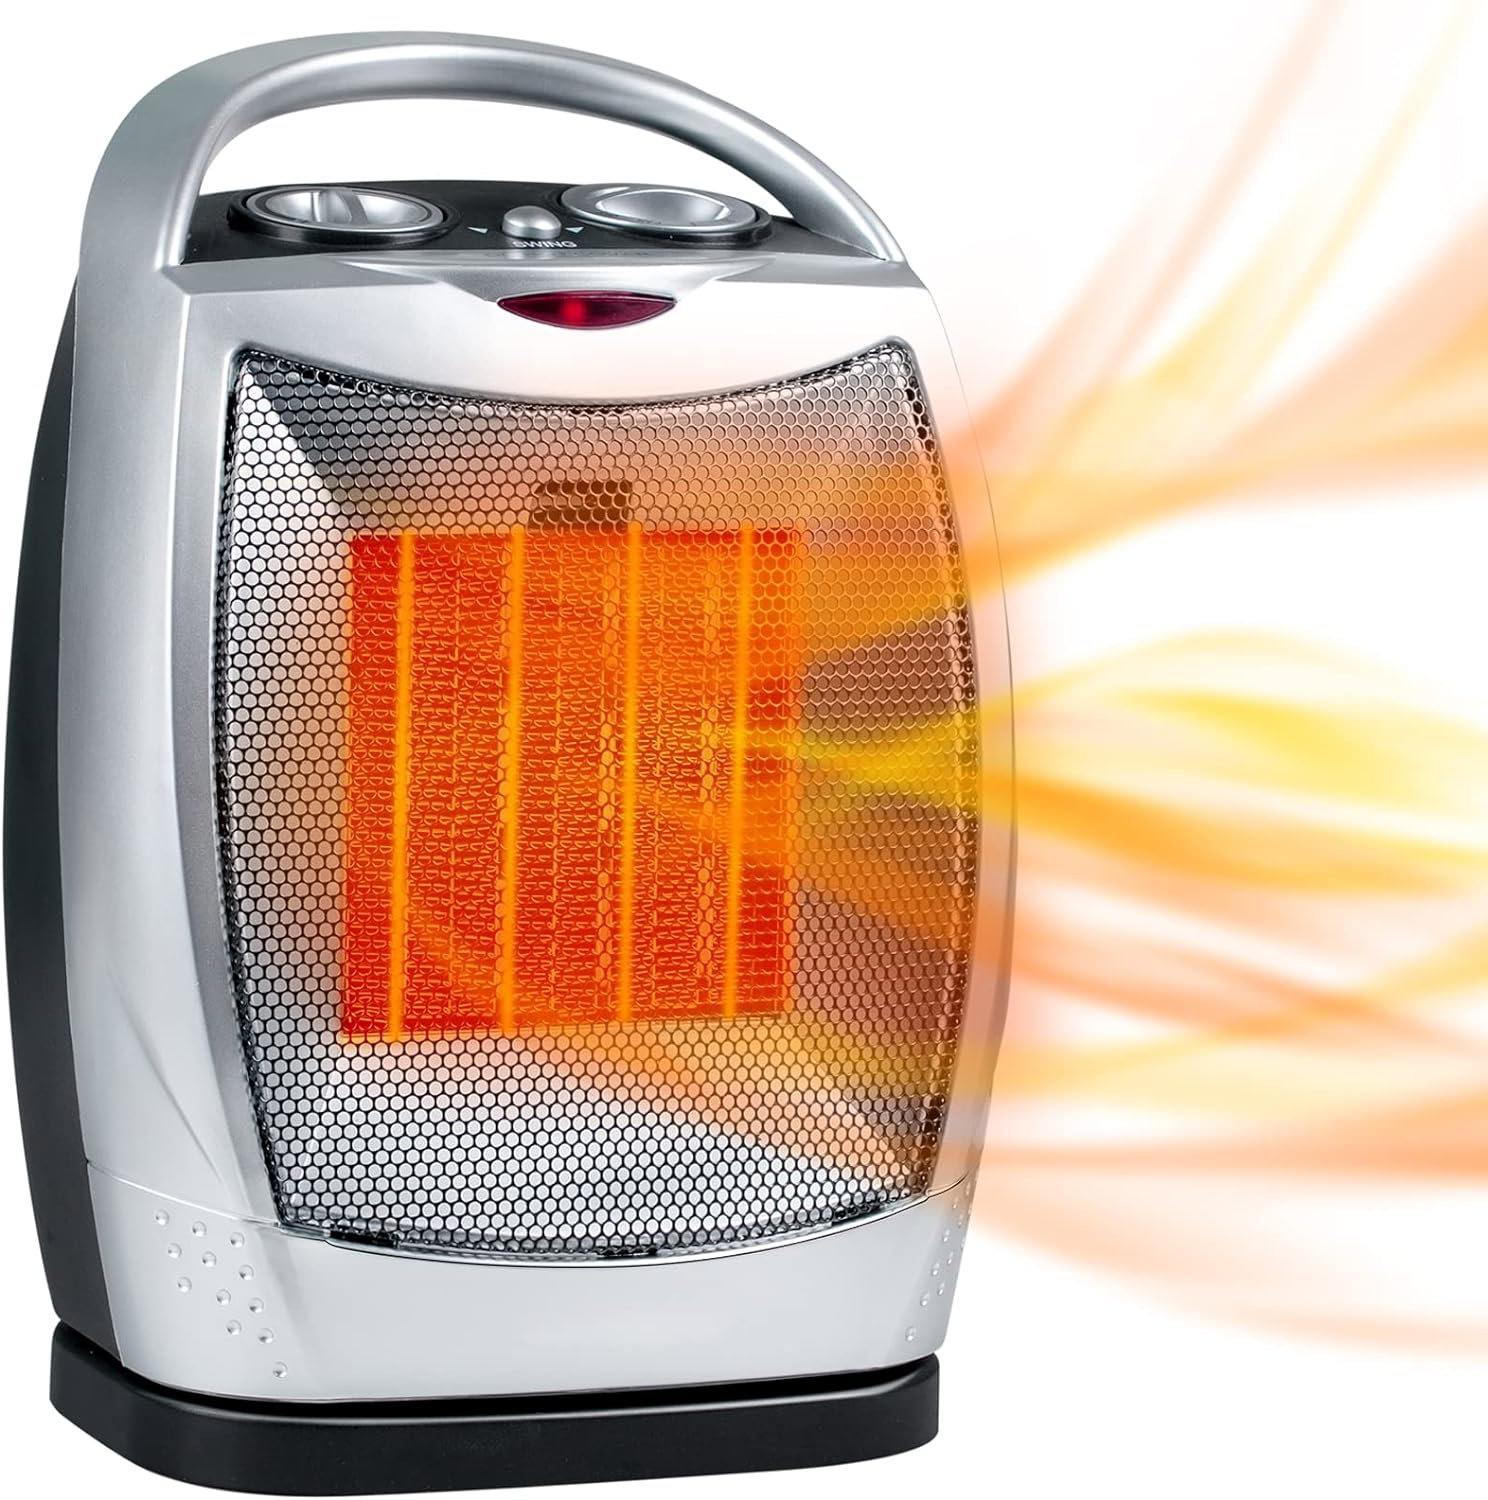 Space Heater 750W with Overheat Protection & Tip-Over Protection Personal Mini Heater with Adjustable Thermostat Fast Heating Portable Space Heater 1500W Perfect for Home or Office